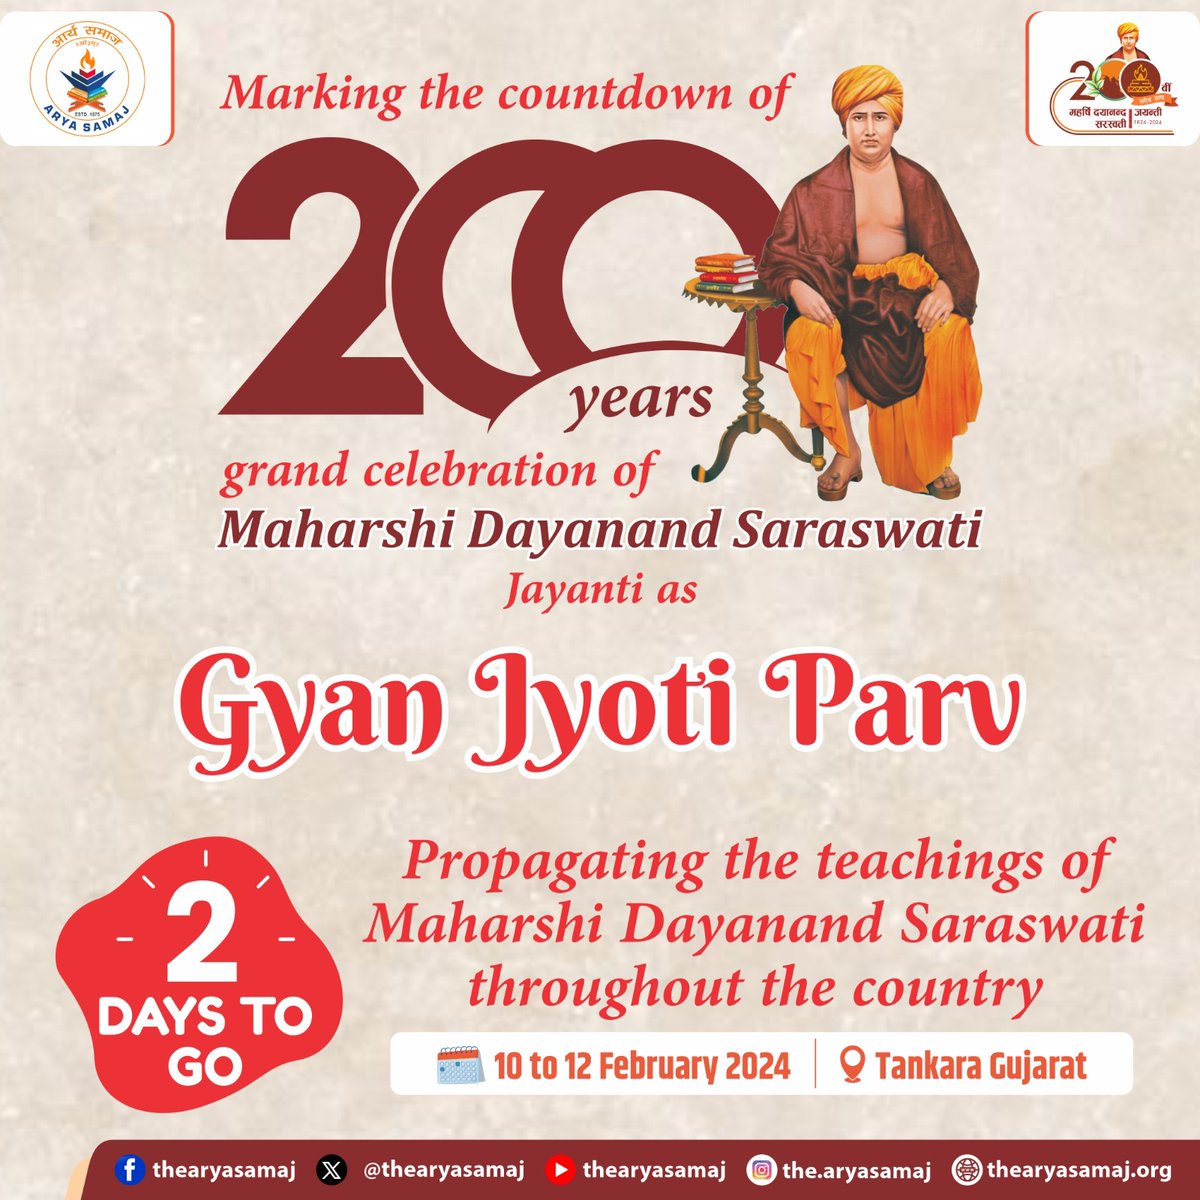 Set your sights on Tankara in just two days for the landmark celebration of #GyanJyotiParv2024!

As we approach the bicentenary of Maharshi Dayanand Saraswati, we extend a heartfelt invitation for you to partake in Gyan Jyoti Parv 2024. This event is a tribute to the perpetual…